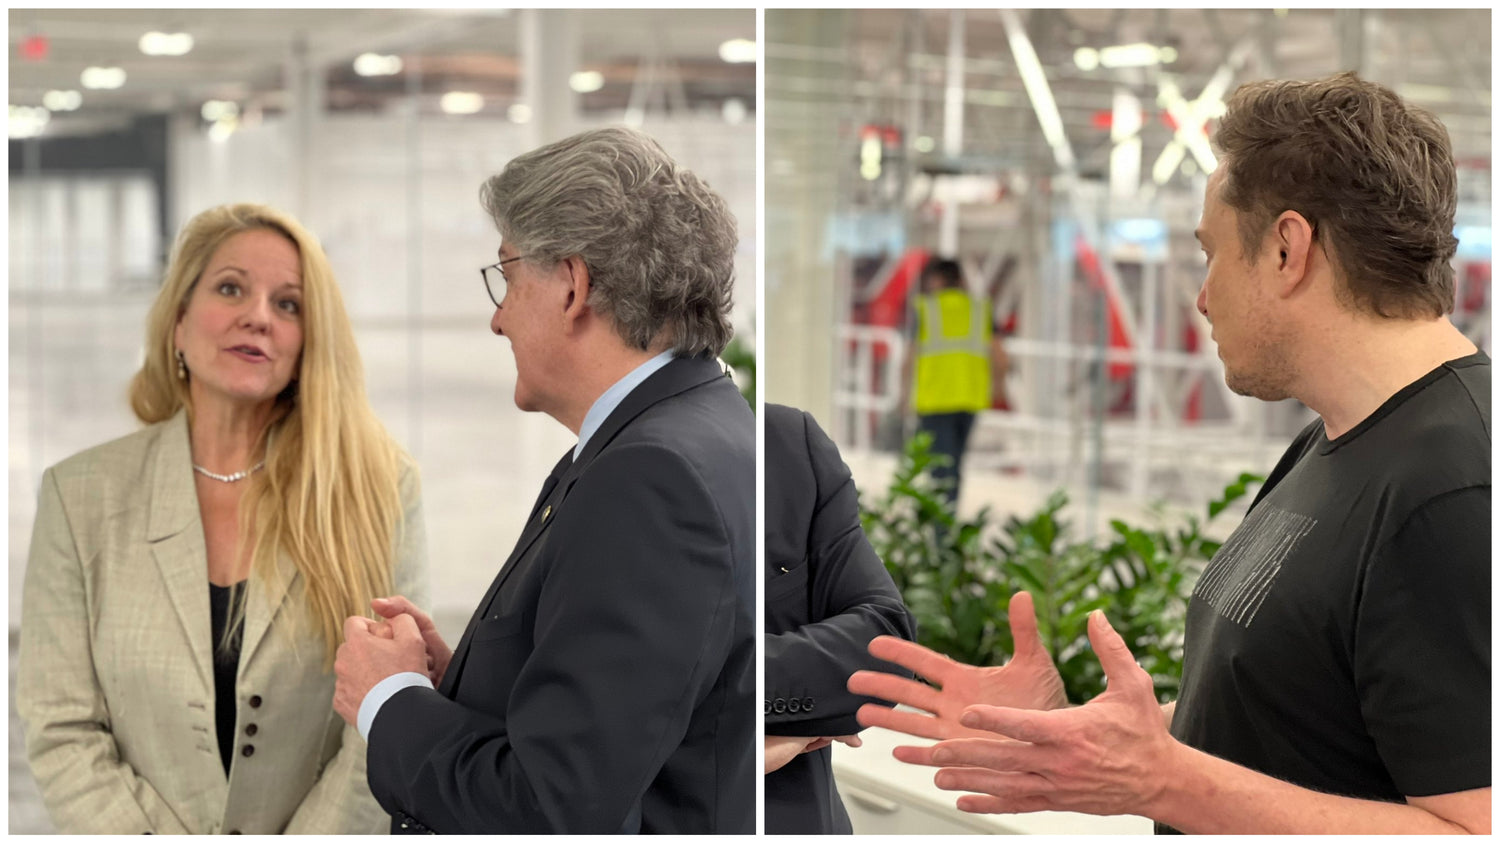 SpaceX President Gwynne Shotwell & Elon Musk meet with European Union Commissioner for the Internal Market Thierry Breton